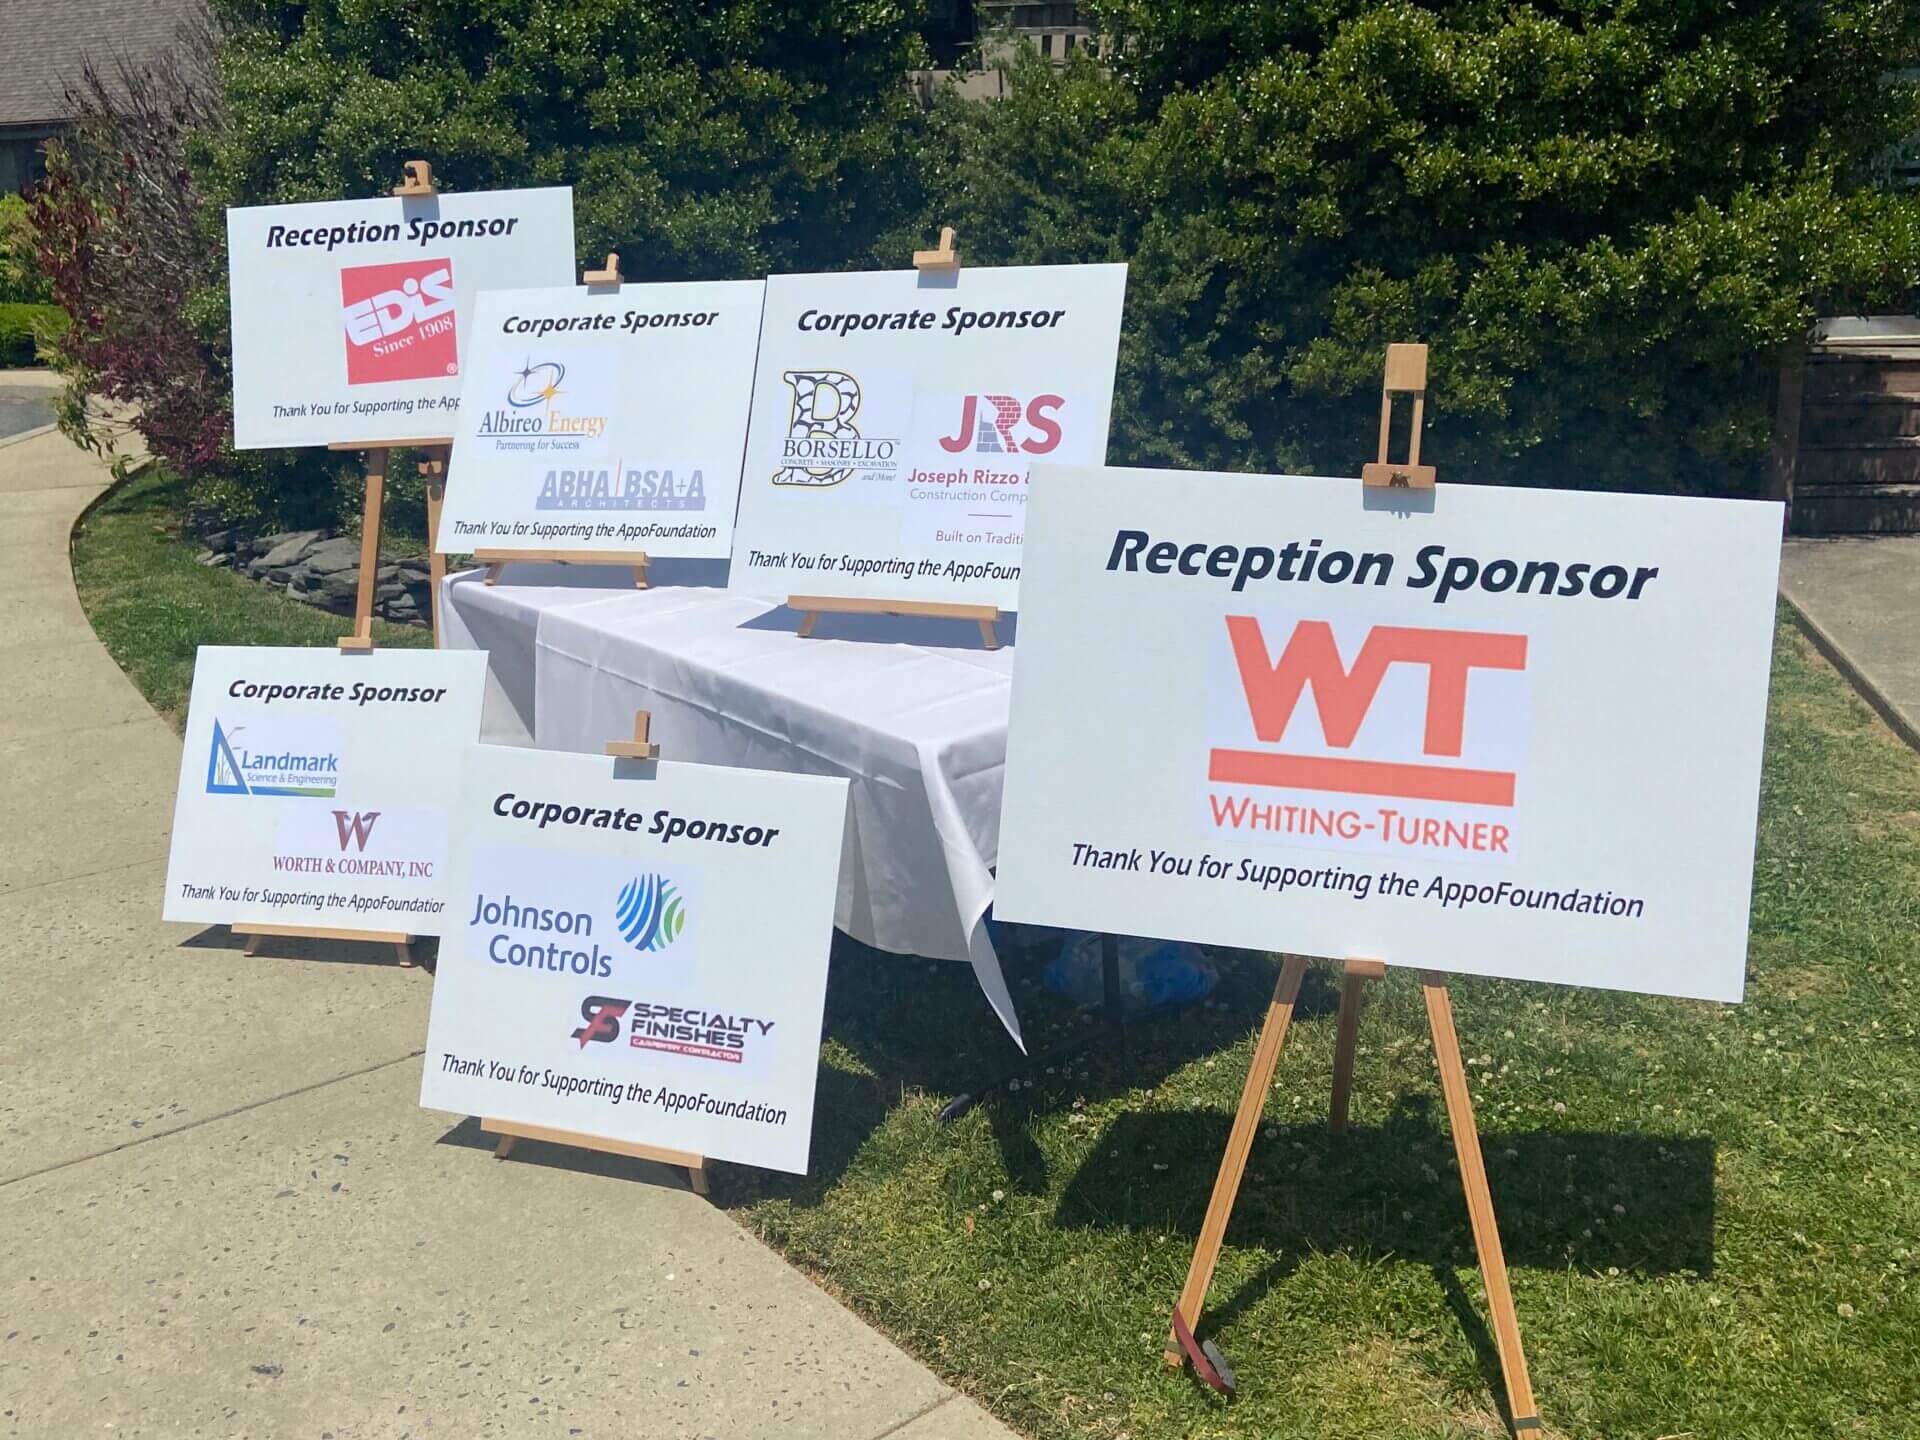 A bunch of boards of reception sponsor whiting turner